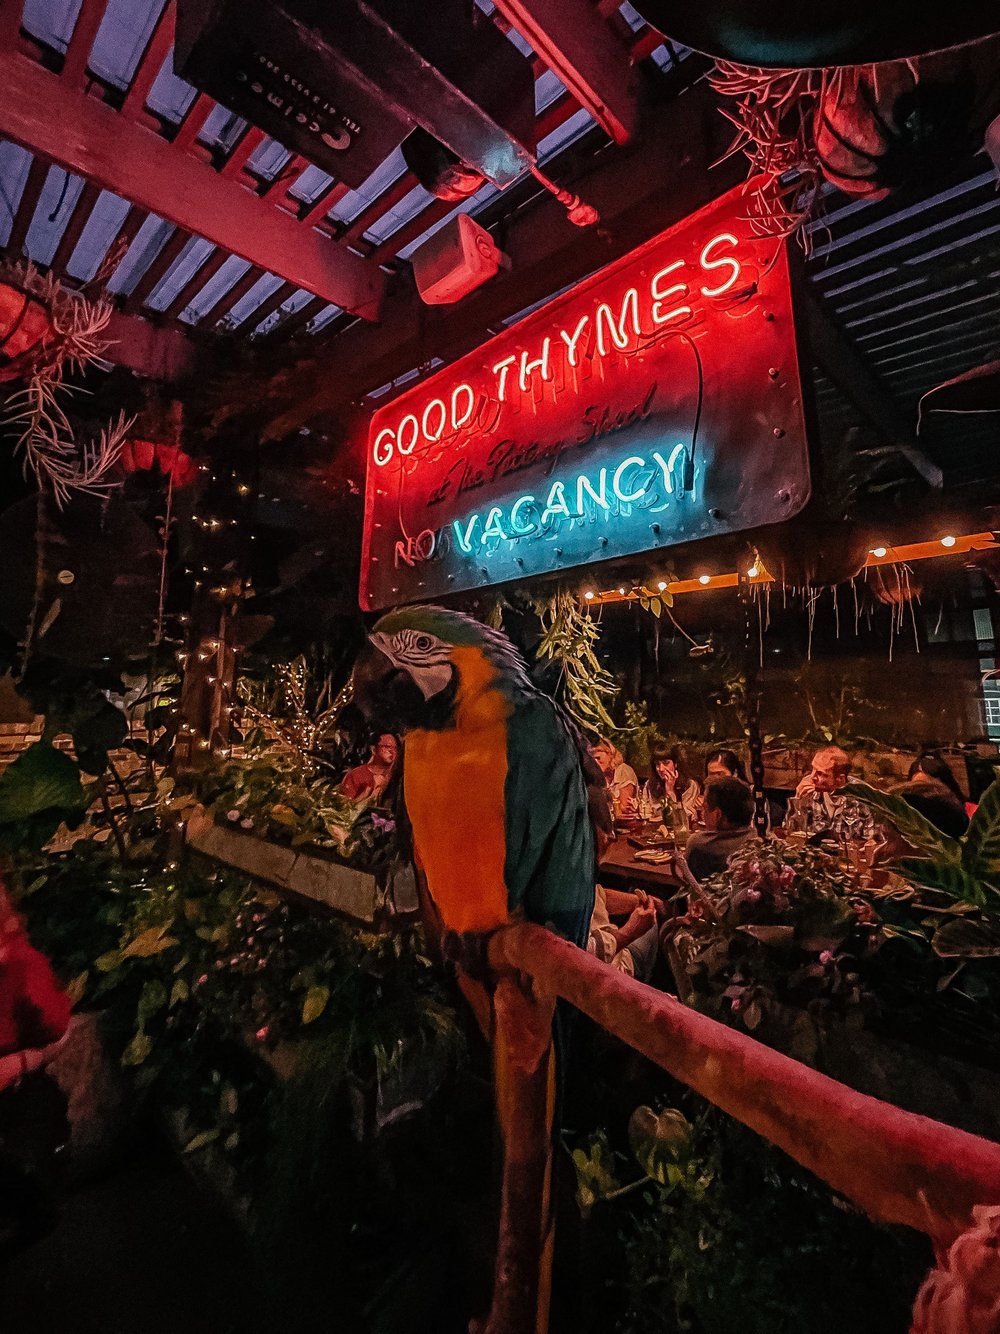 Fluffy the macaw - The Potting Shed - Sydney - New South Wales (NSW) - Australia